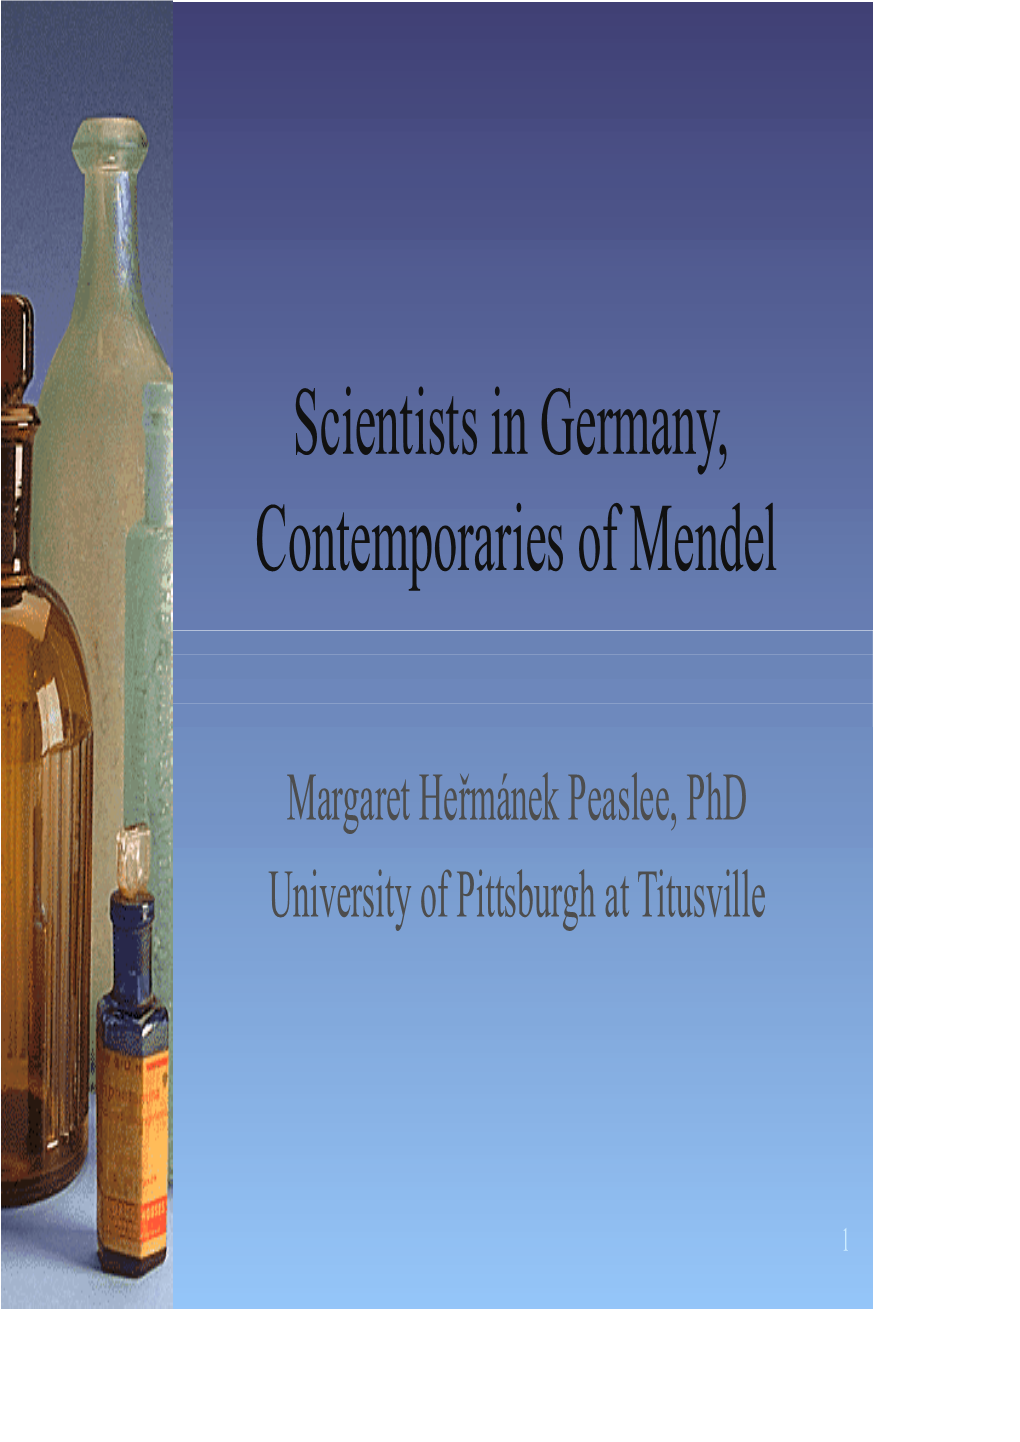 Scientists in Germany, Contemporaries of Mendel